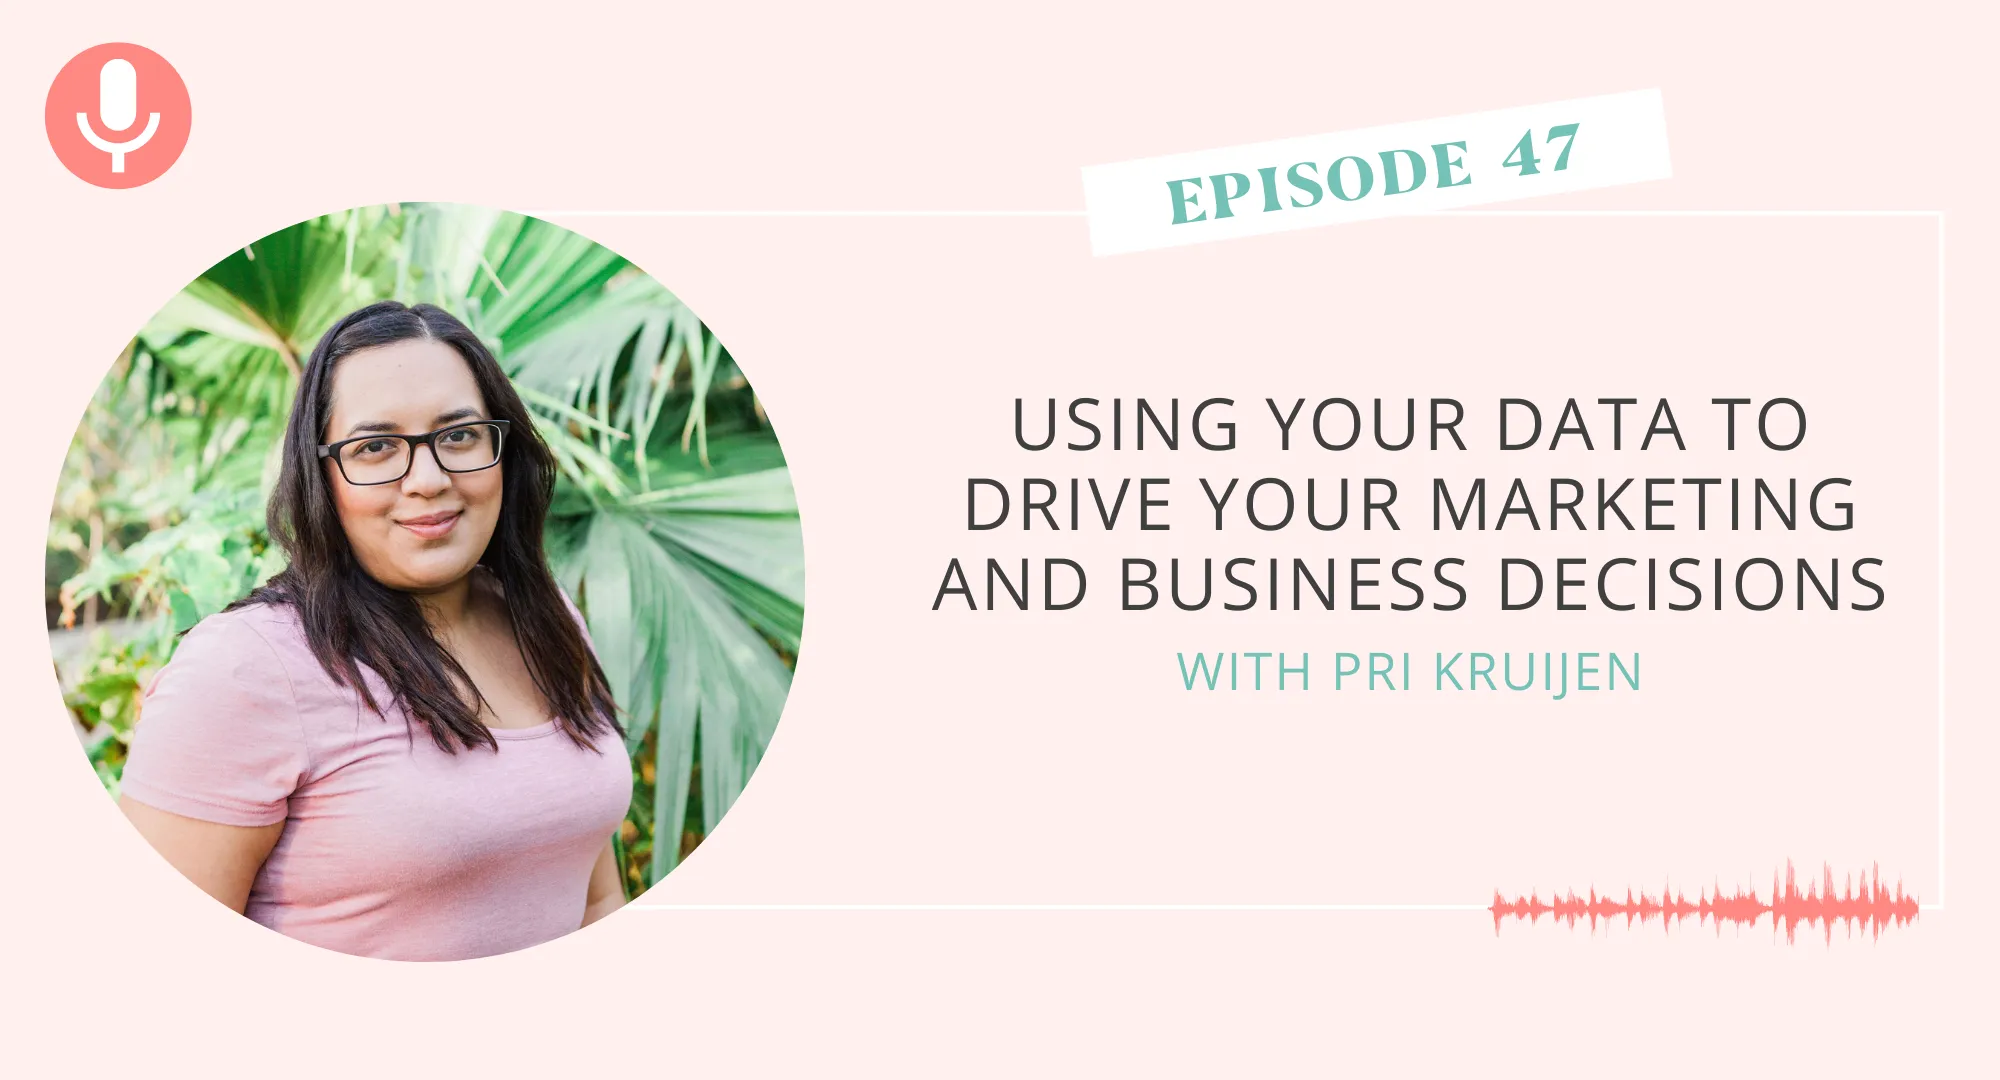 Using Your Data to Drive Your Marketing and Business Decisions with Pri Kruijen